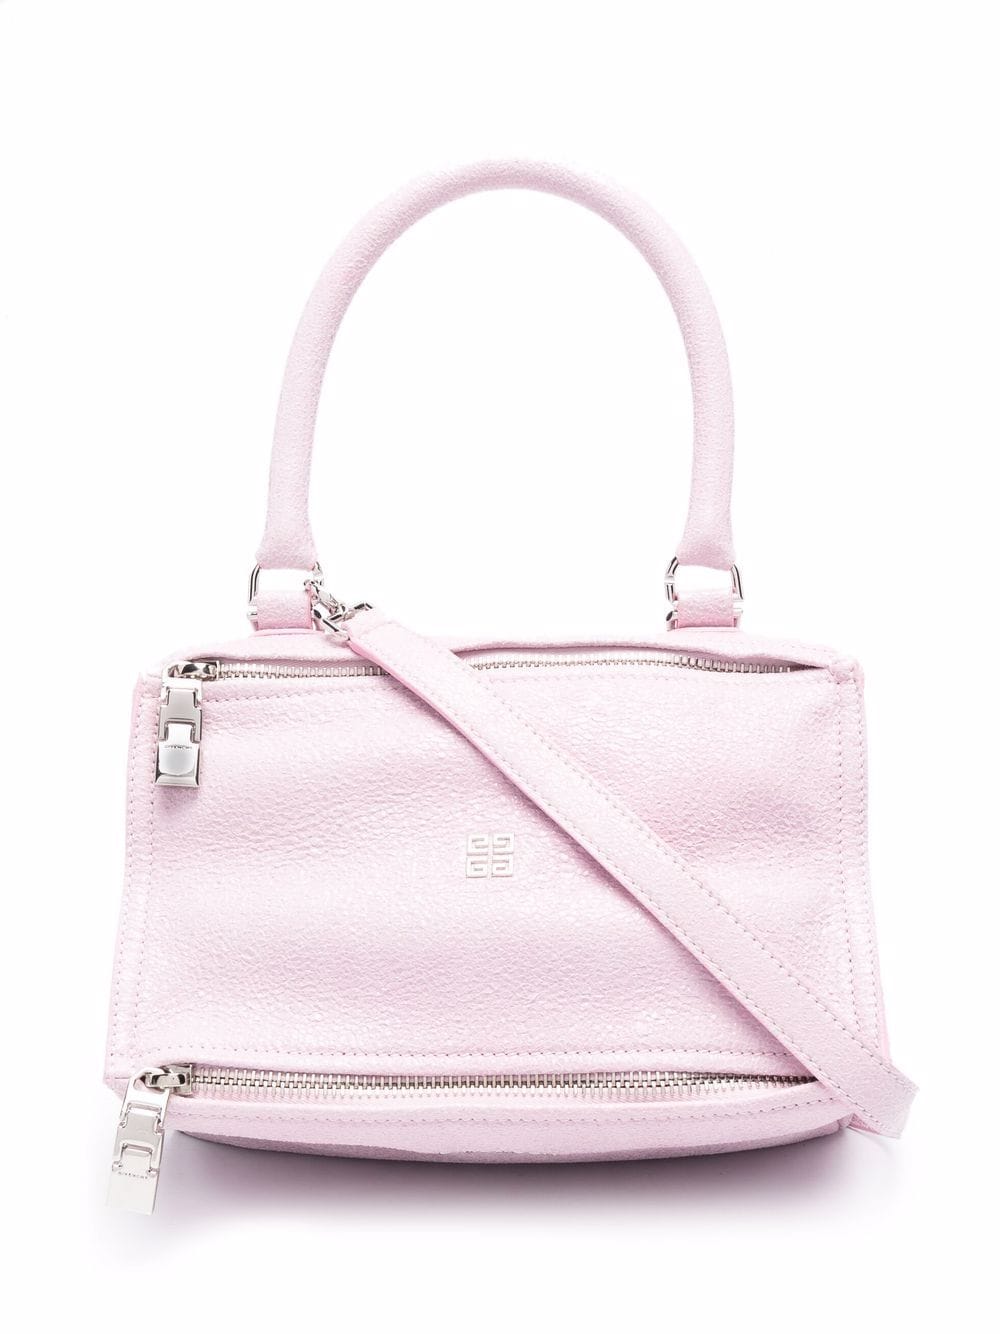 Givenchy Small Pandora Bag In Pink Leather With Metallic Effect